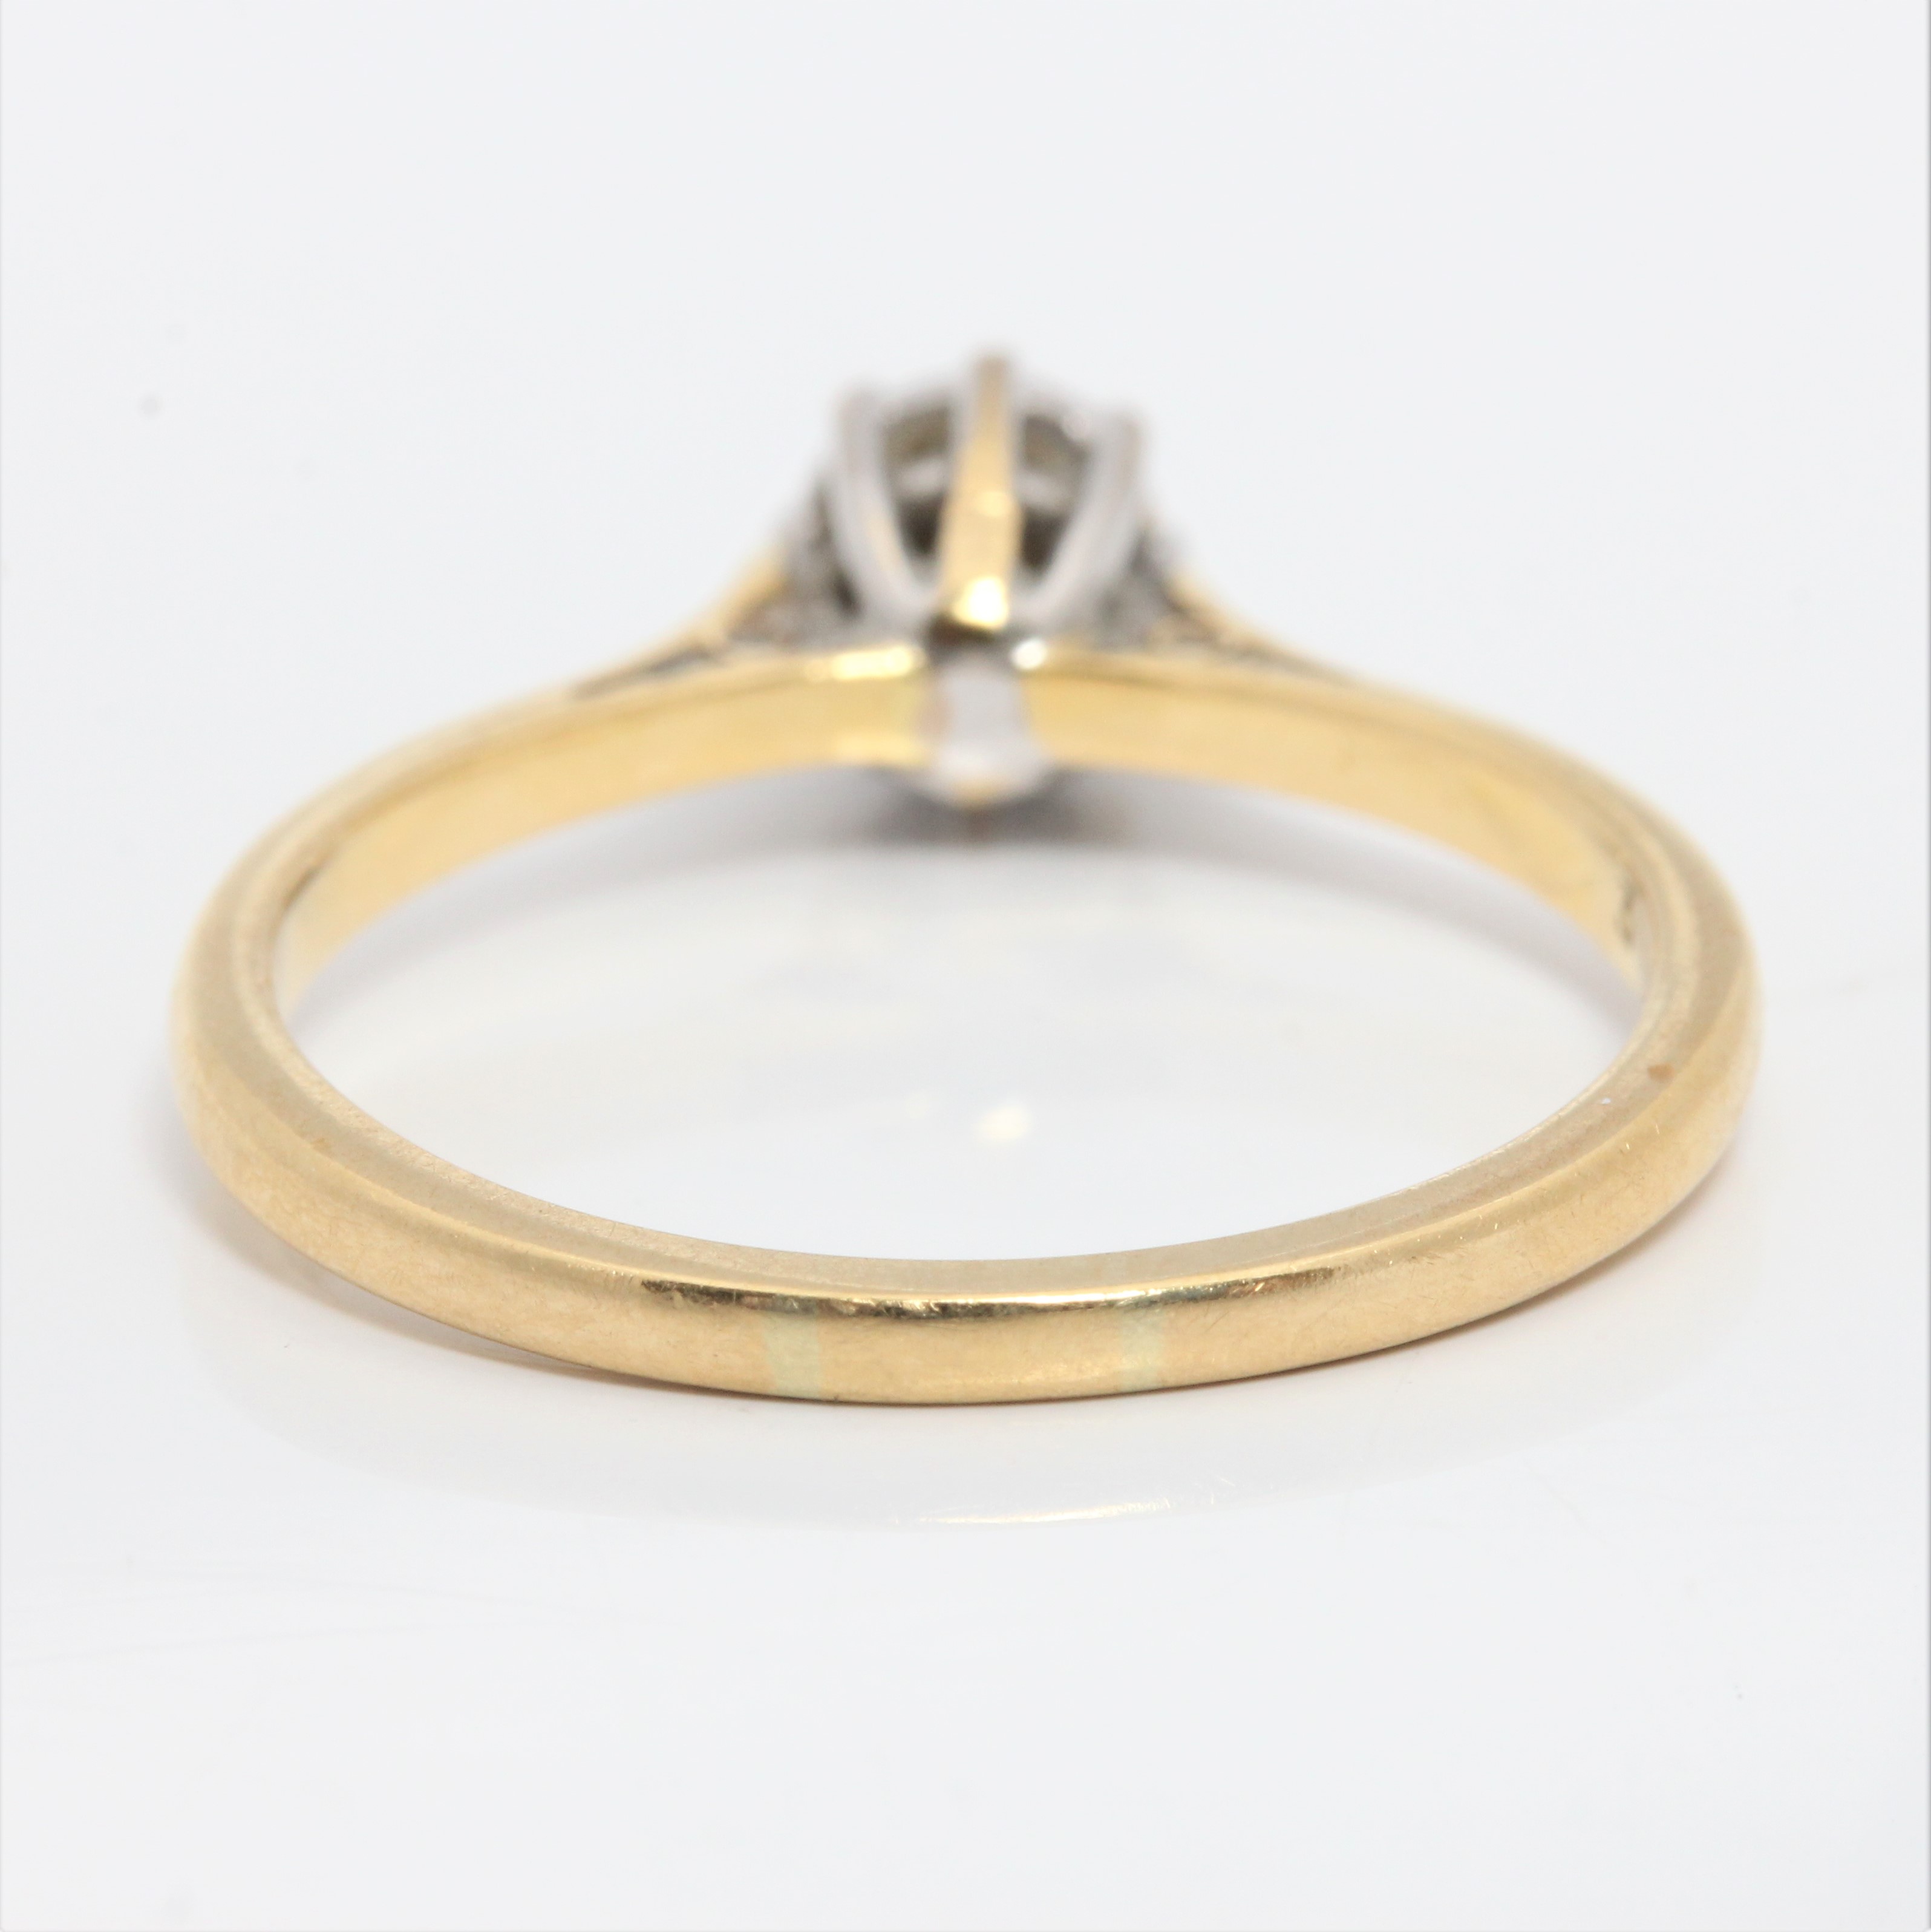 A hallmarked 18ct yellow gold diamond solitaire ring, illusion set with a round brilliant cut - Image 3 of 4